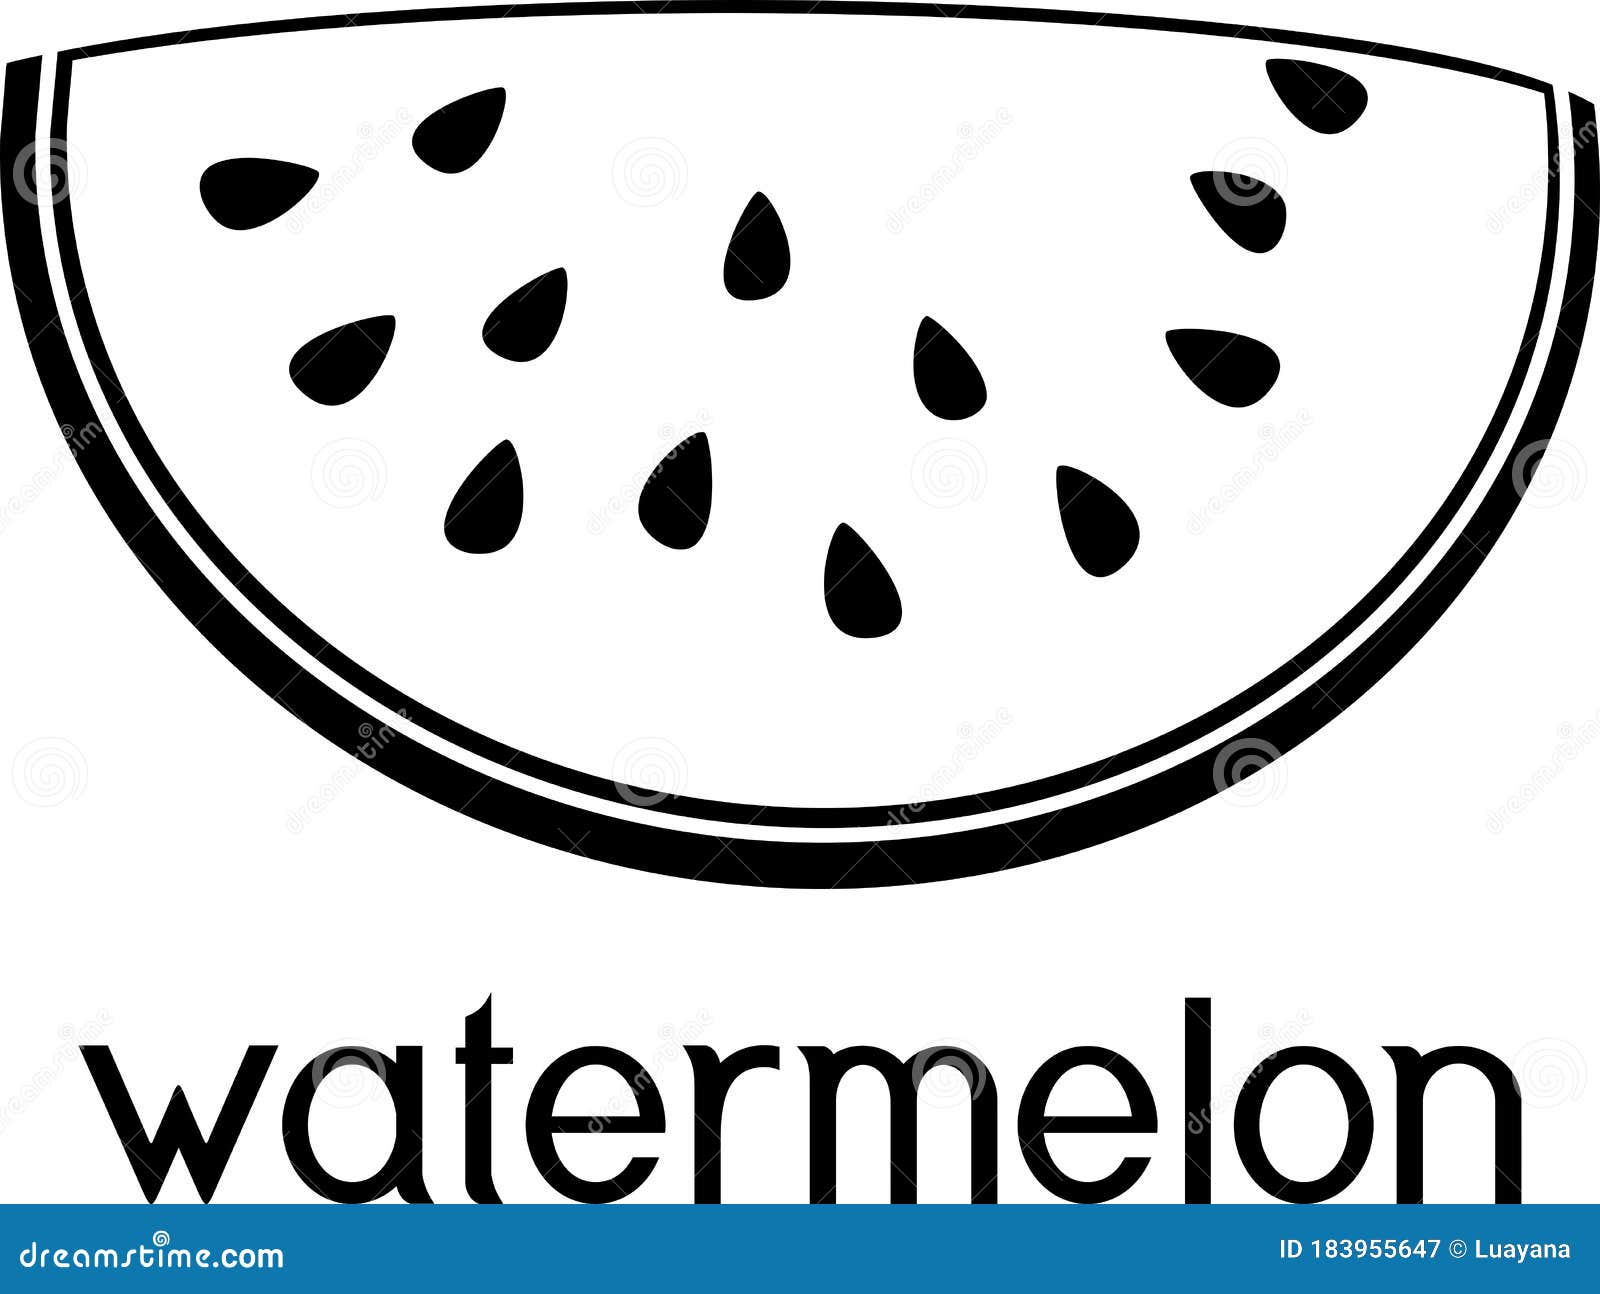 Coloring page watermelon stock vector illustration of coloring